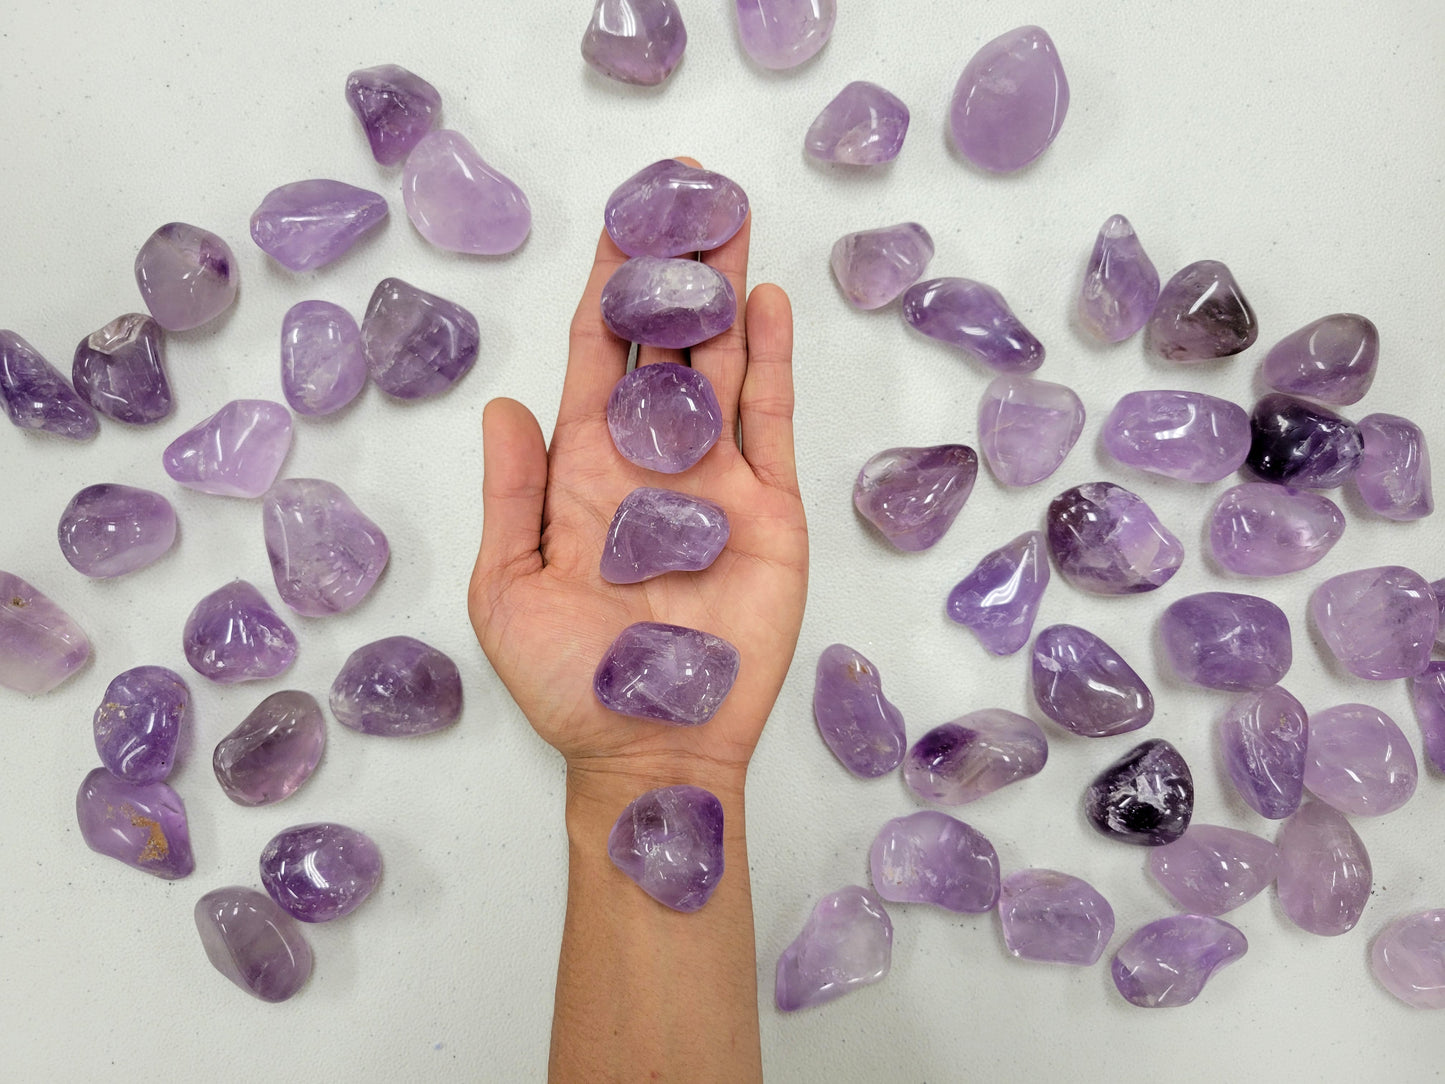 Large Tumbled Amethyst Crystals